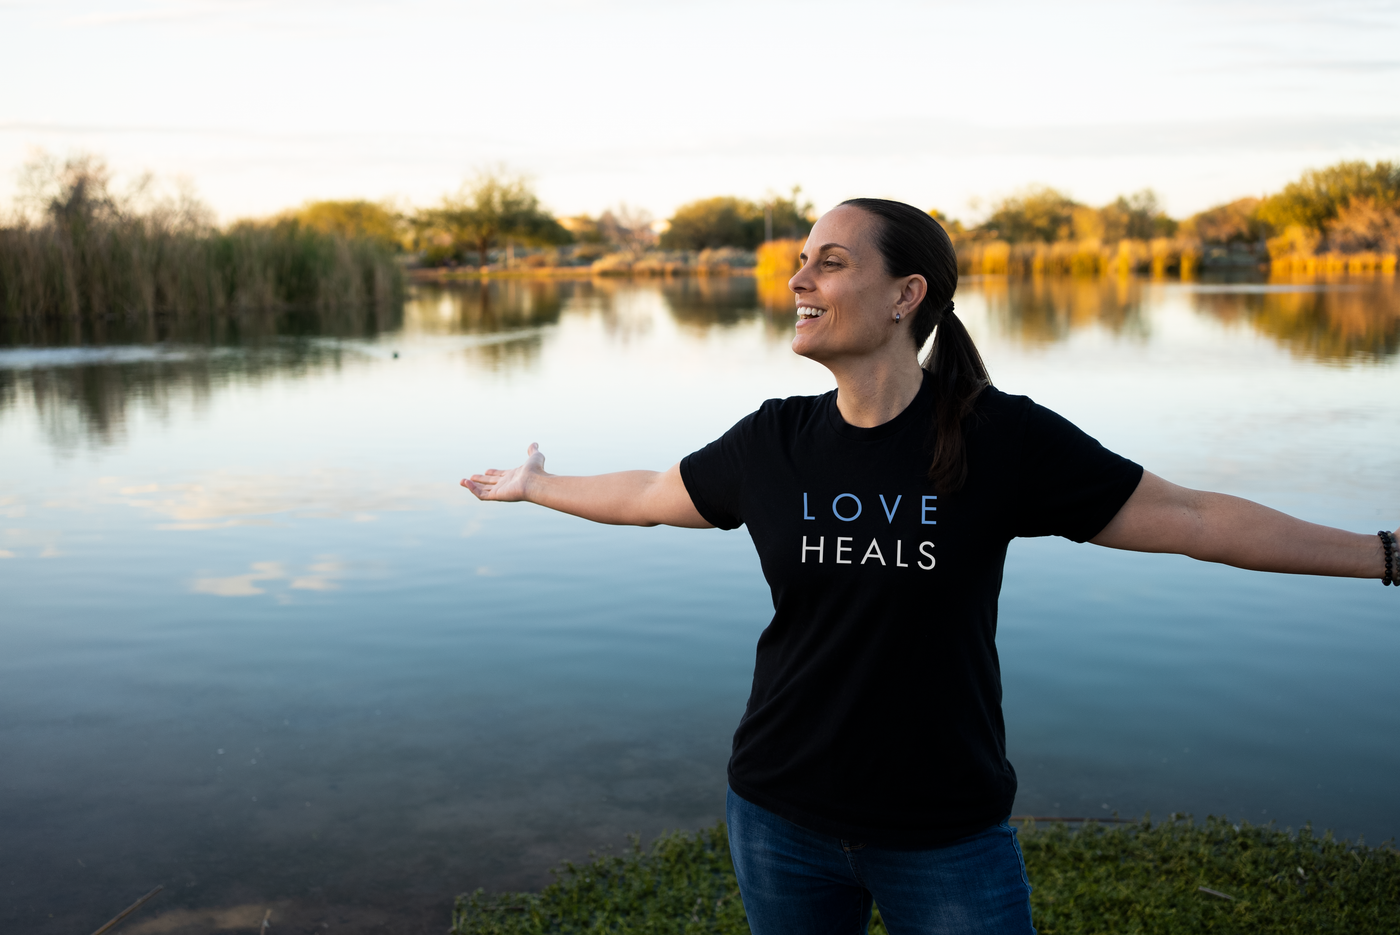 photo of human with arms spread wearing only human shirt that reads "LOVE HEALS"